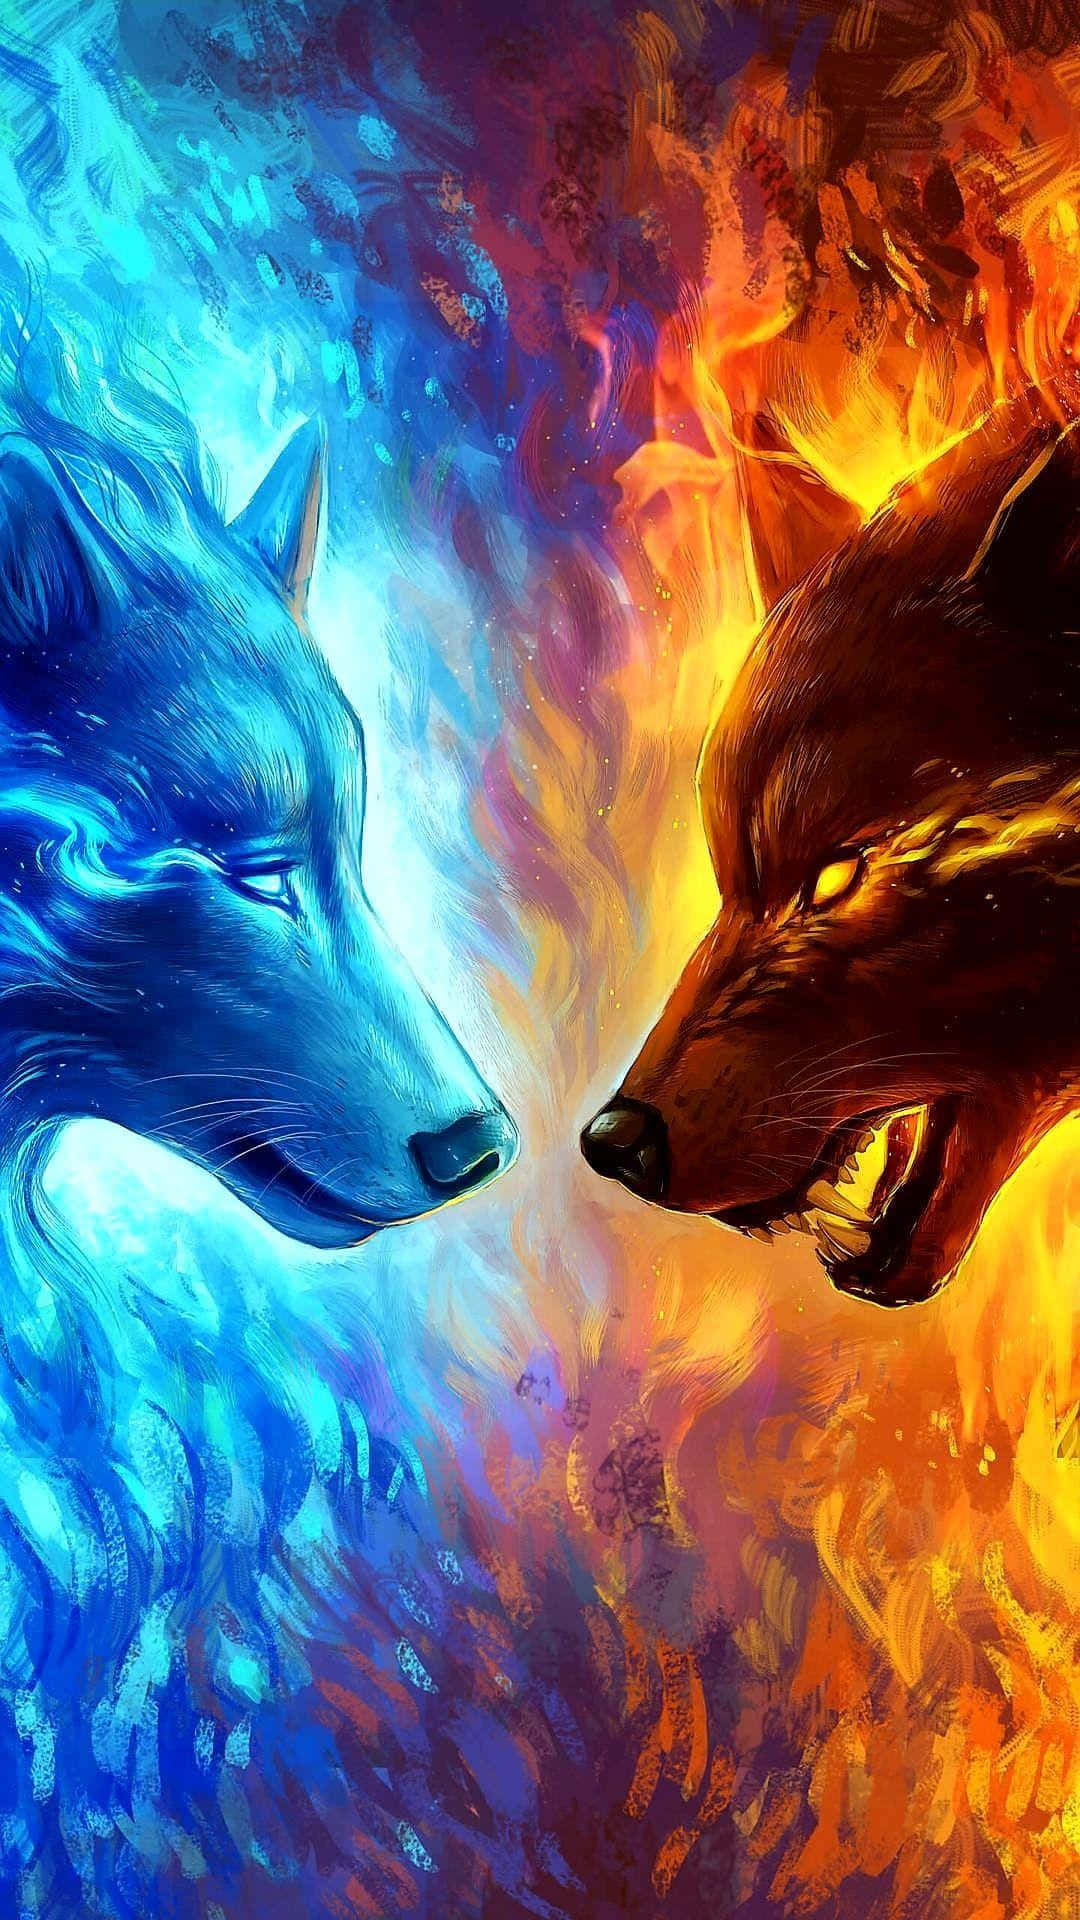 The Battle Between Fire and Ice Wallpaper